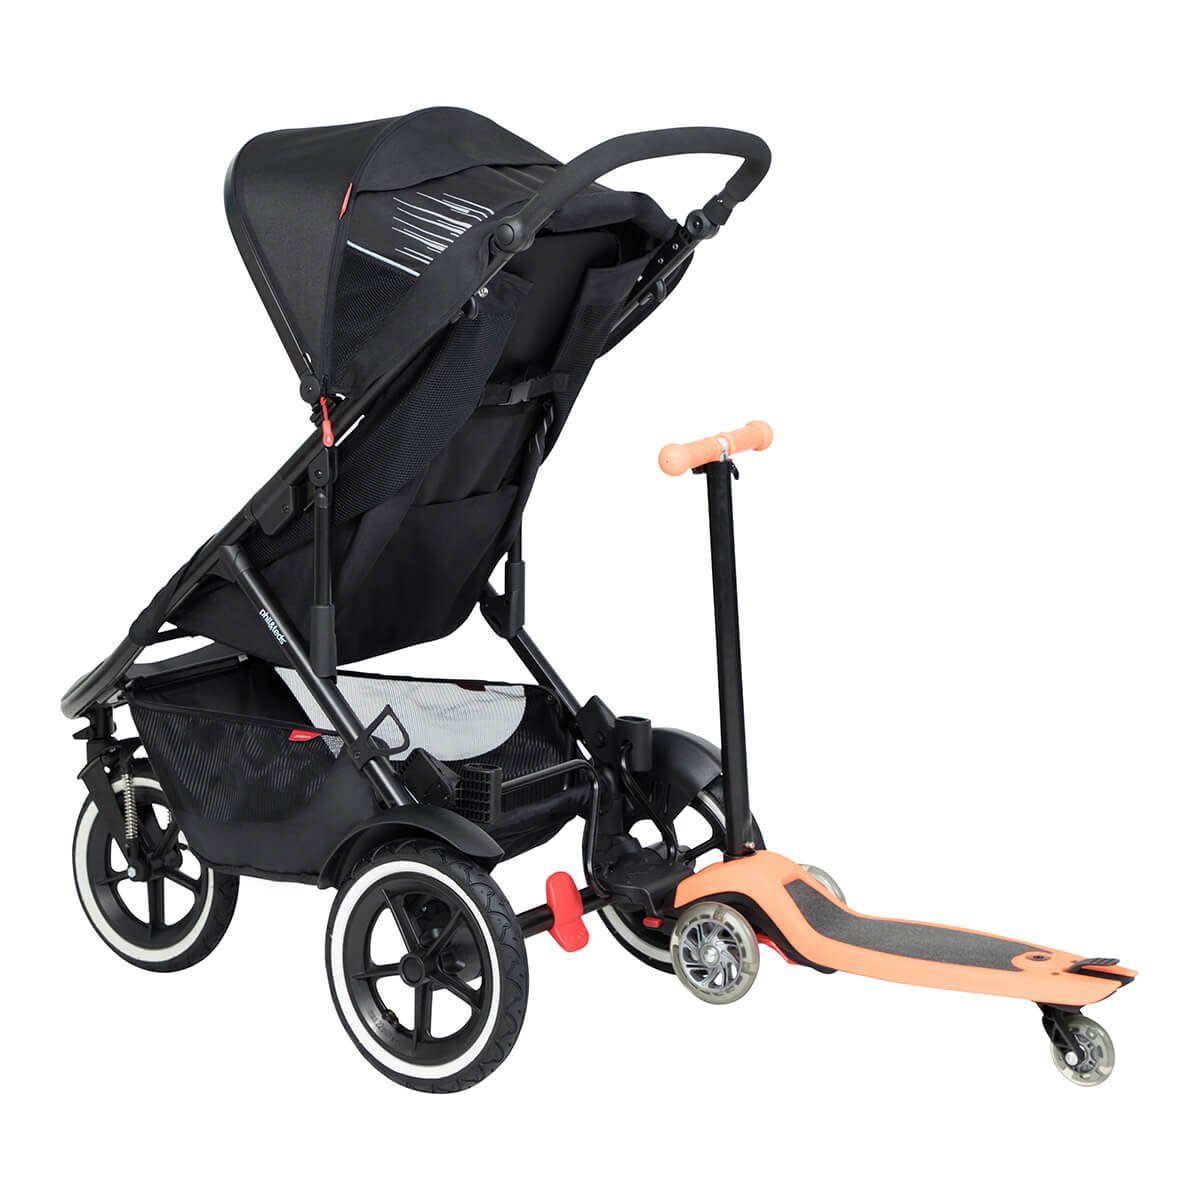 https://cdn.accentuate.io/4417276117026/19437753860274/philteds-sport-buggy-with-freerider-stroller-board-in-rear-v1626482705950.jpg?1200x1200